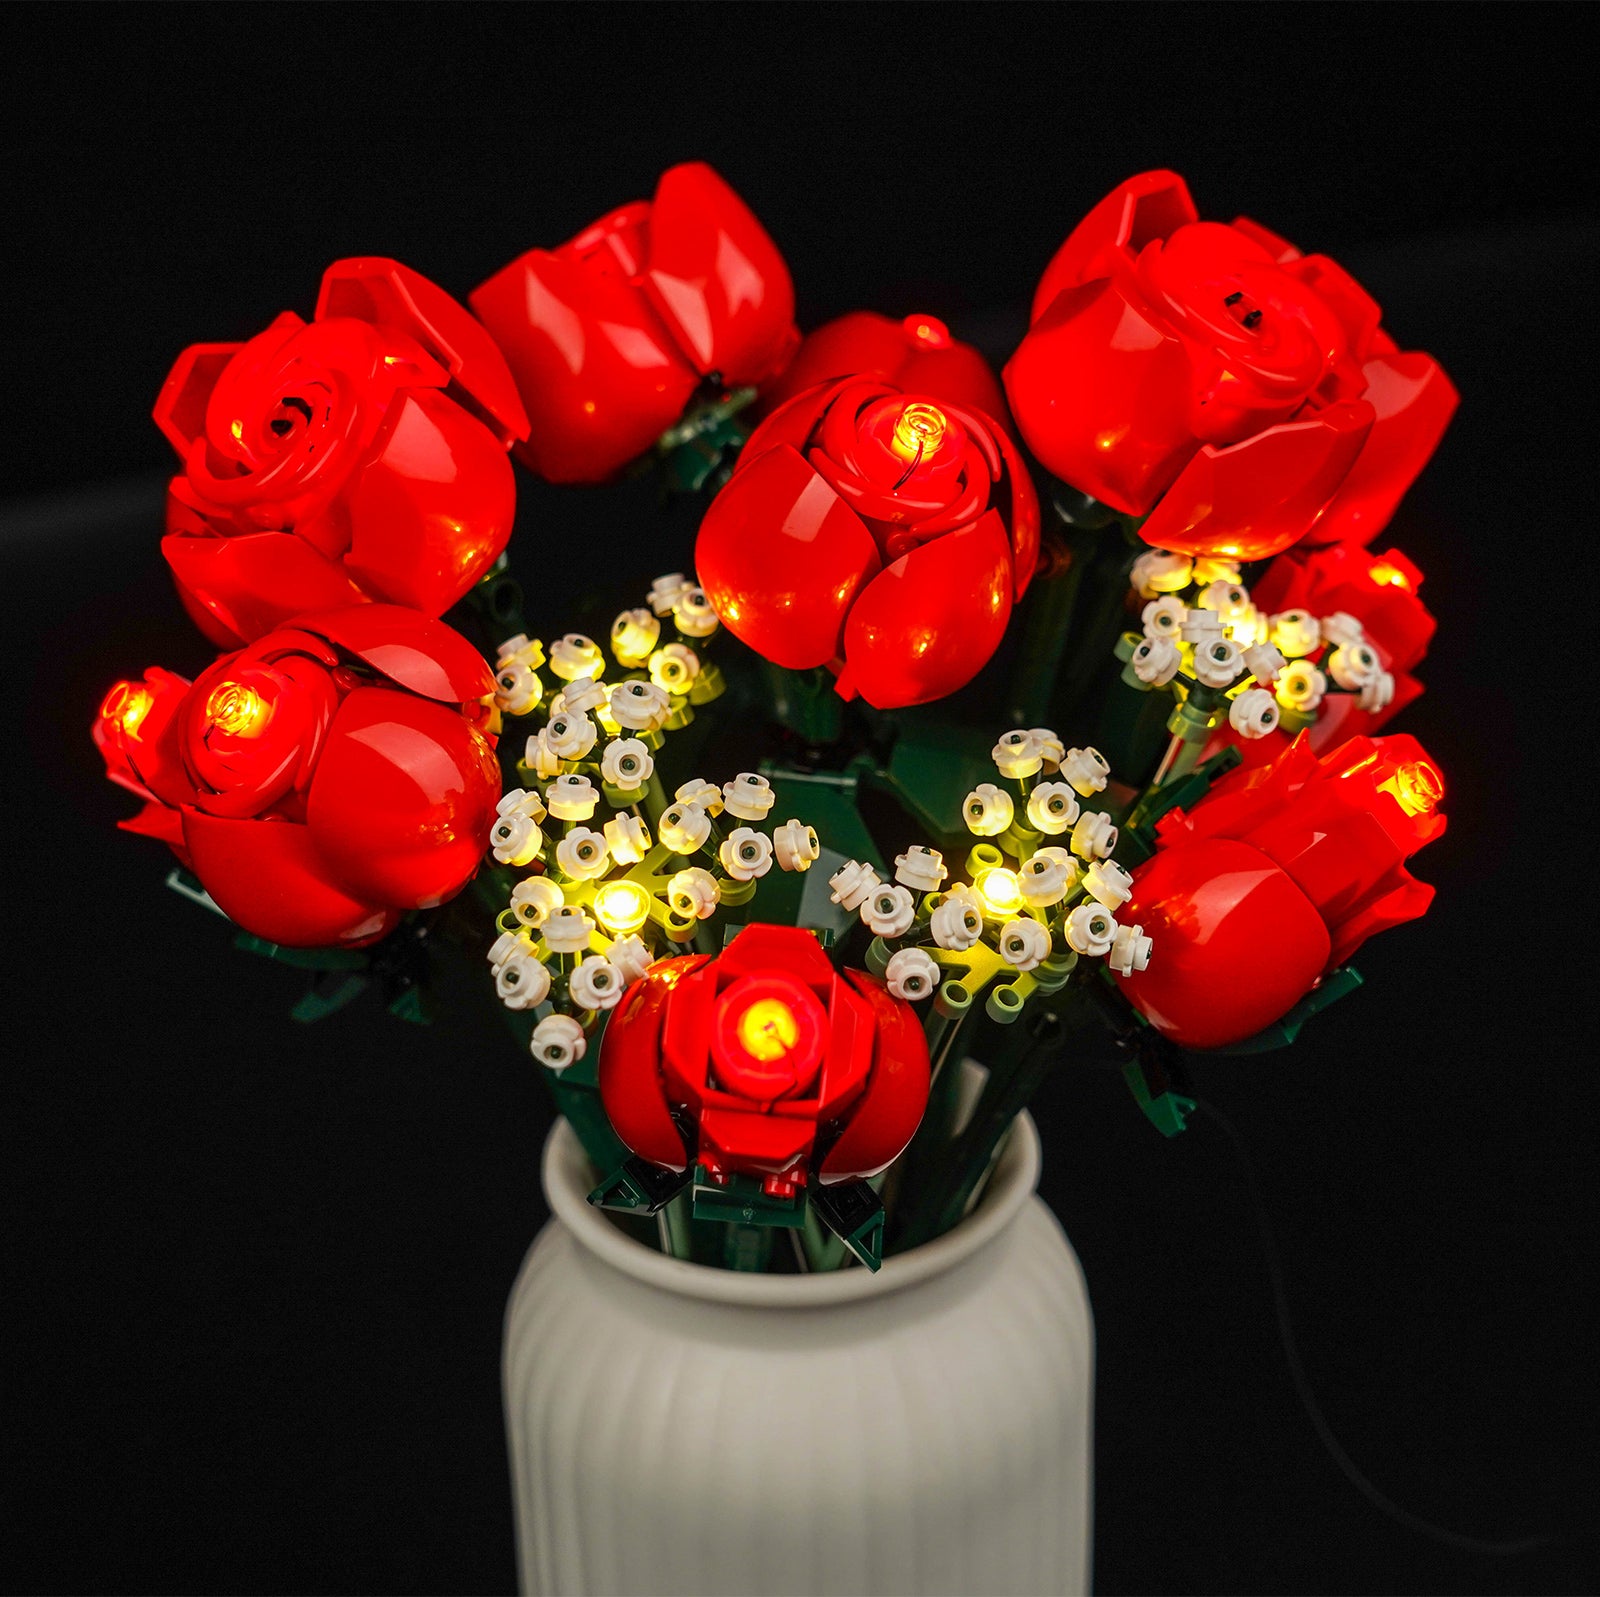  YEABRICKS LED Light for Lego-10328 Icons Bouquet of Roses  Building Blocks Model (Lego Set NOT Included) : Toys & Games